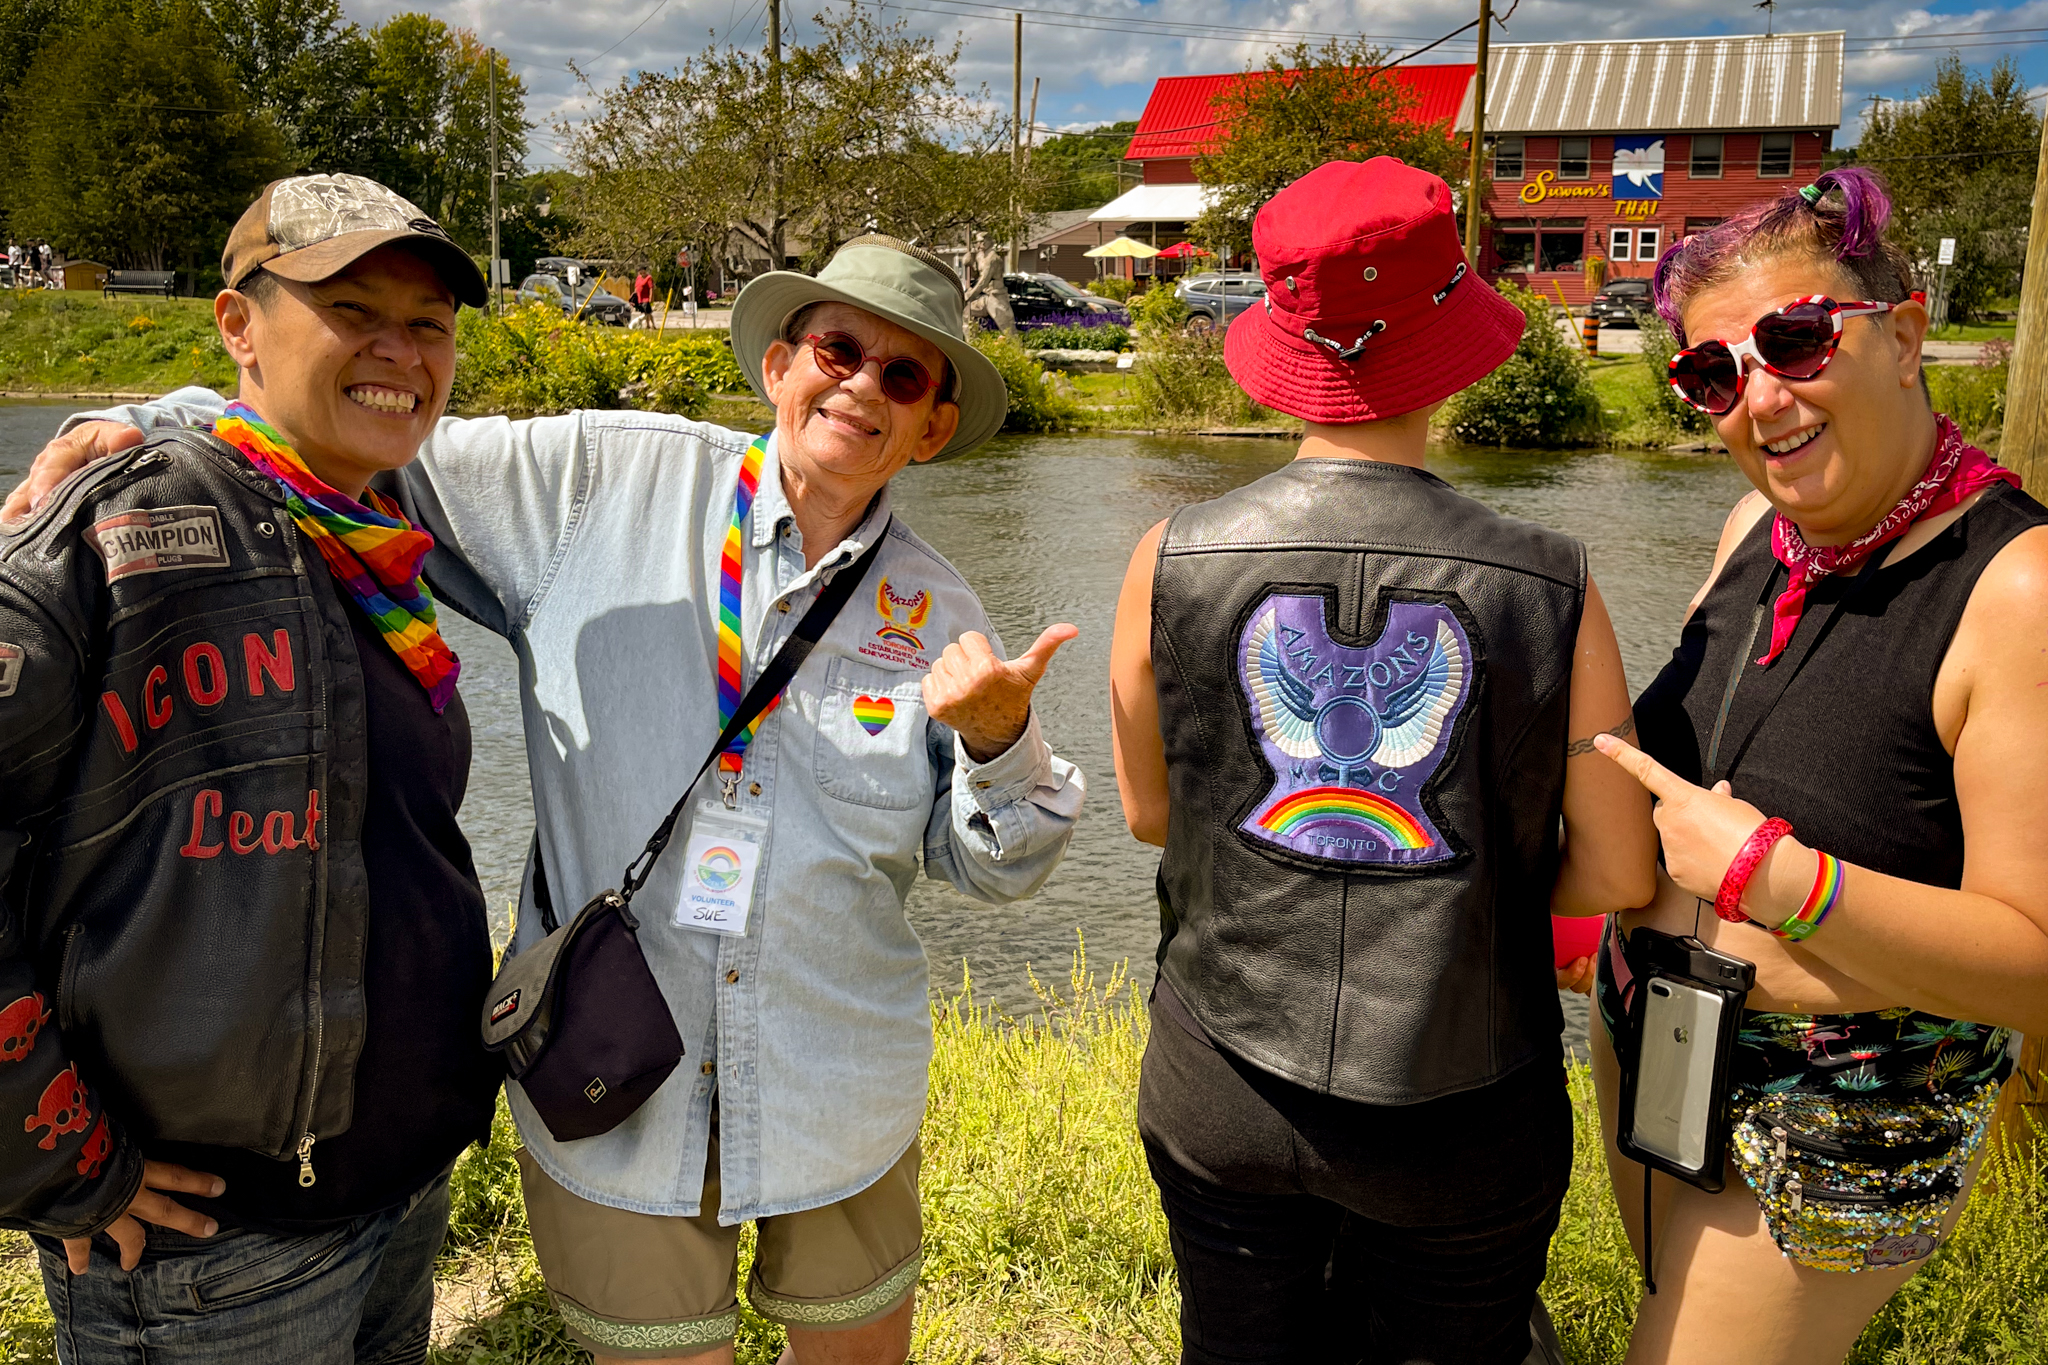 3 smiling people pointing at the large rainbow and purple "Amazons" patch on the back of a forth person's vest.